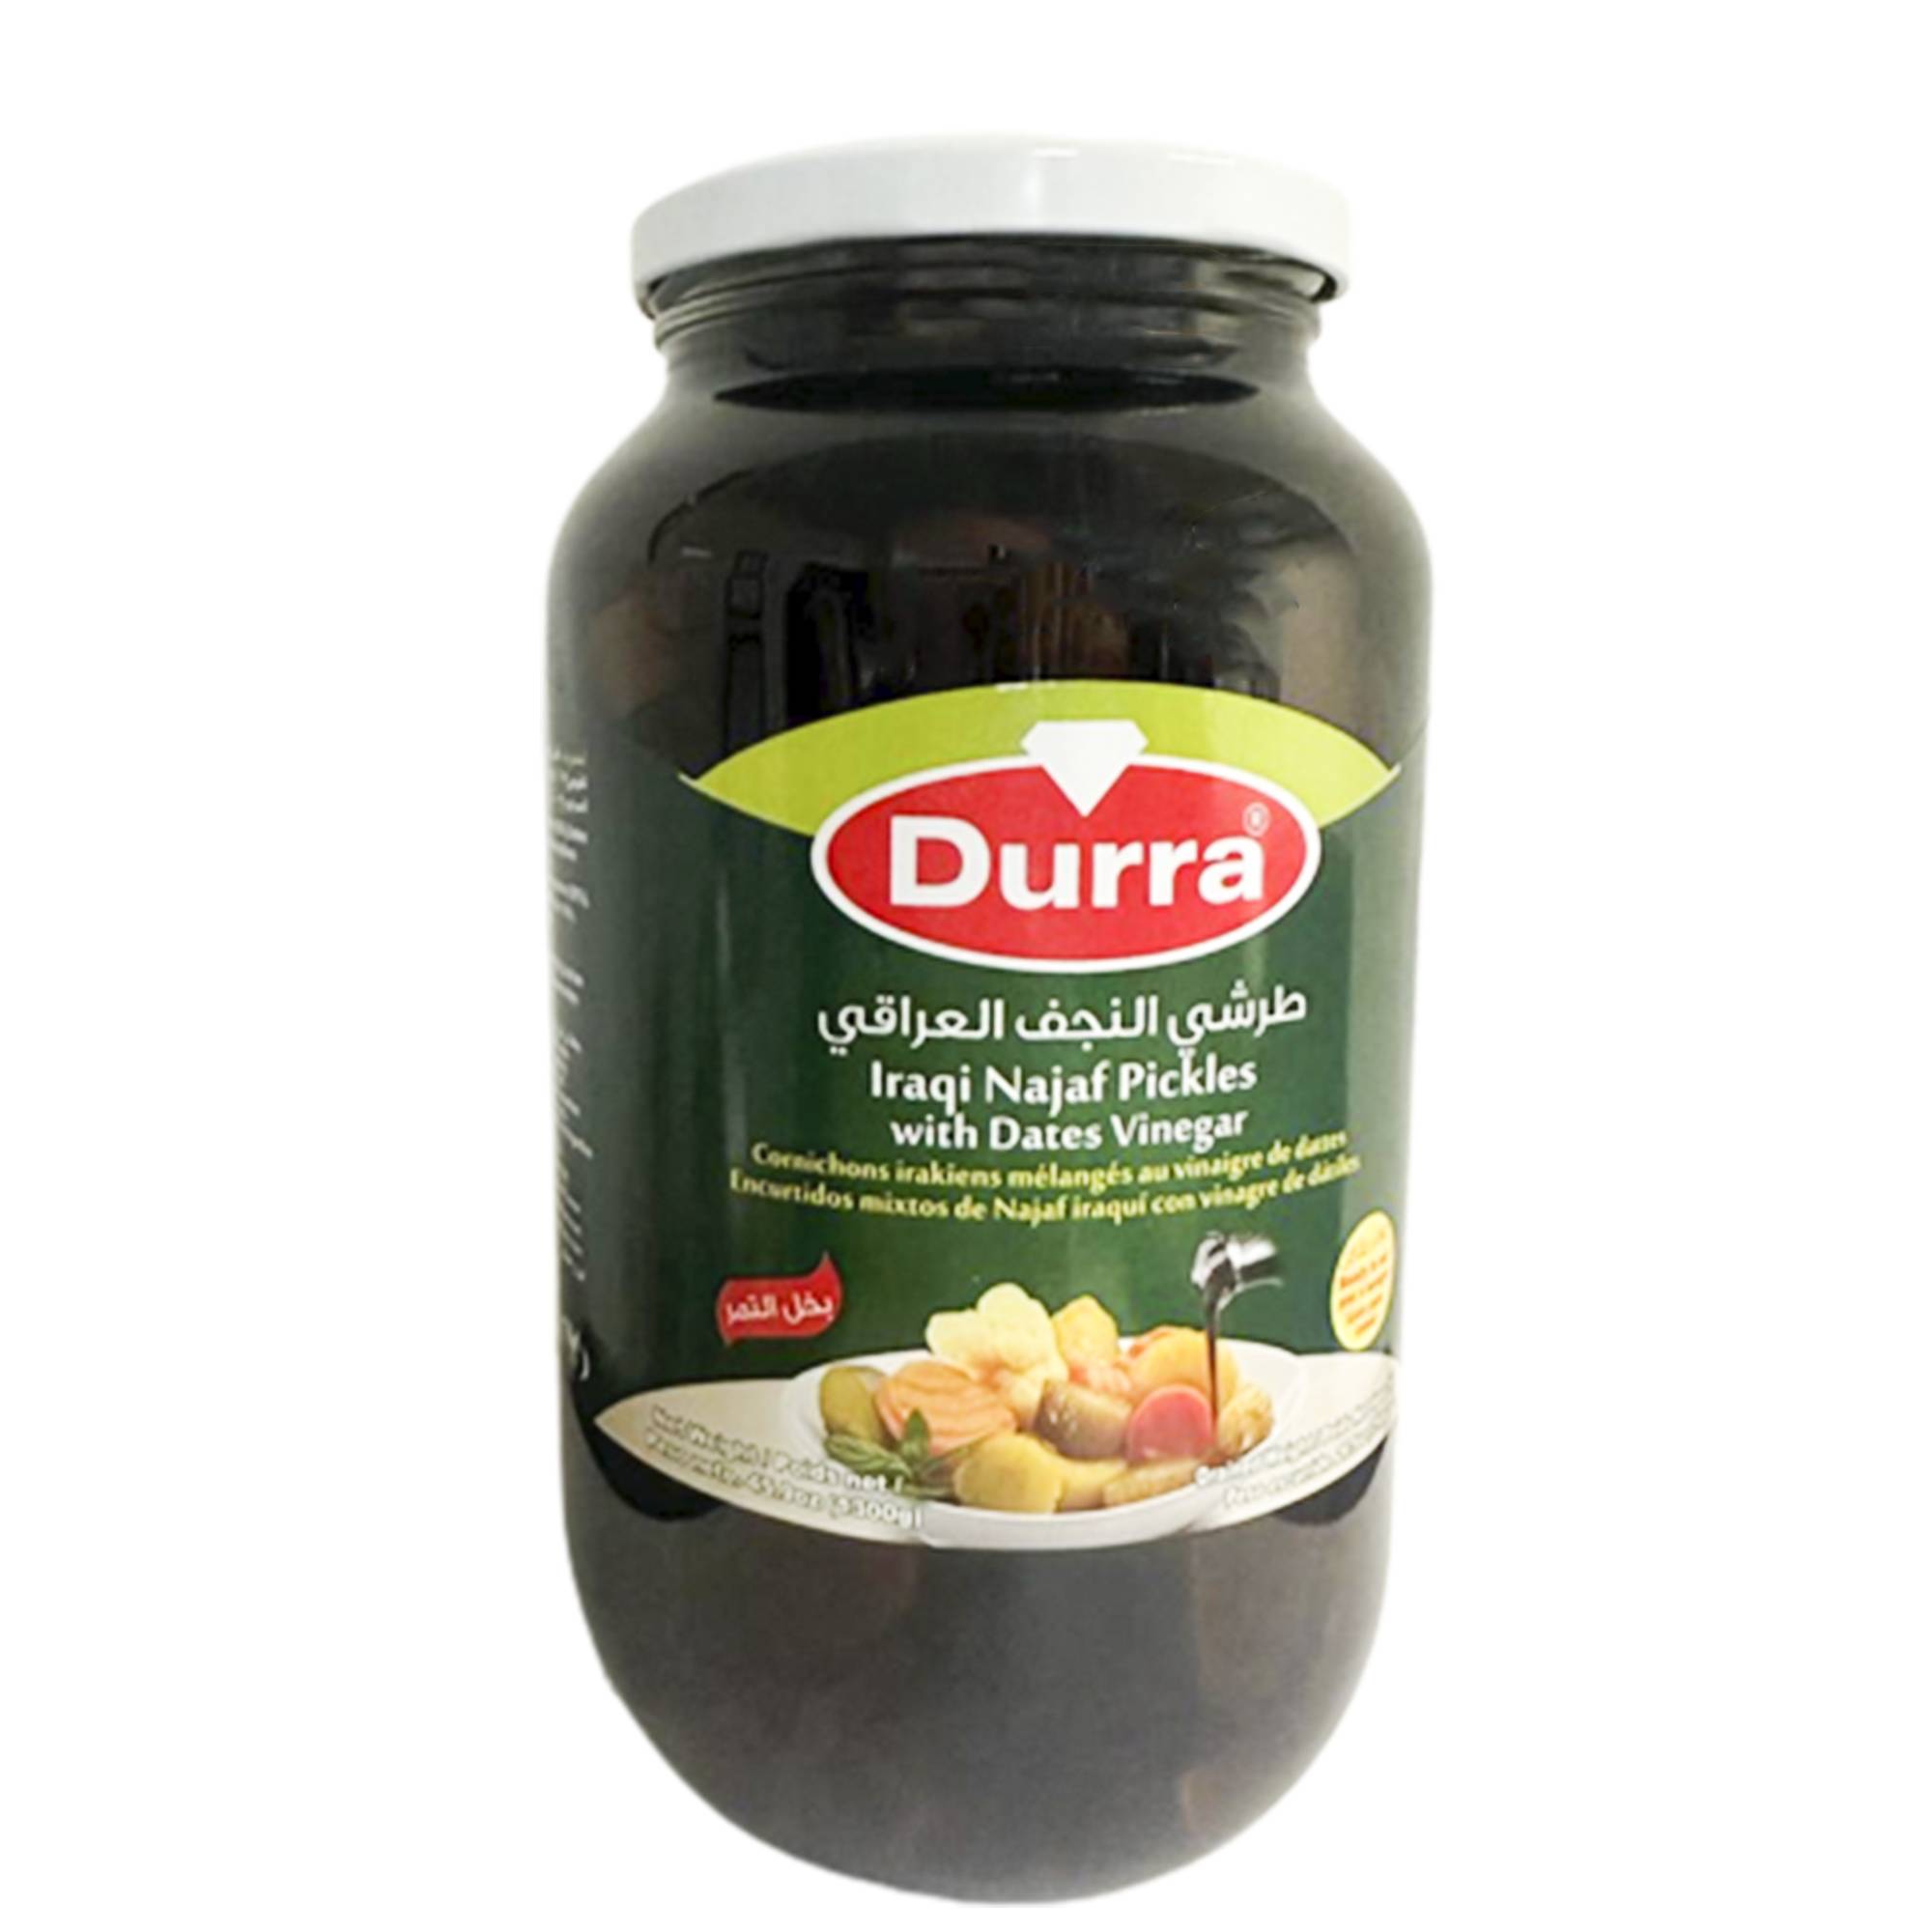 Durra Iraqi Najaf Mixed Pickles with Date Syrup 1300g. 